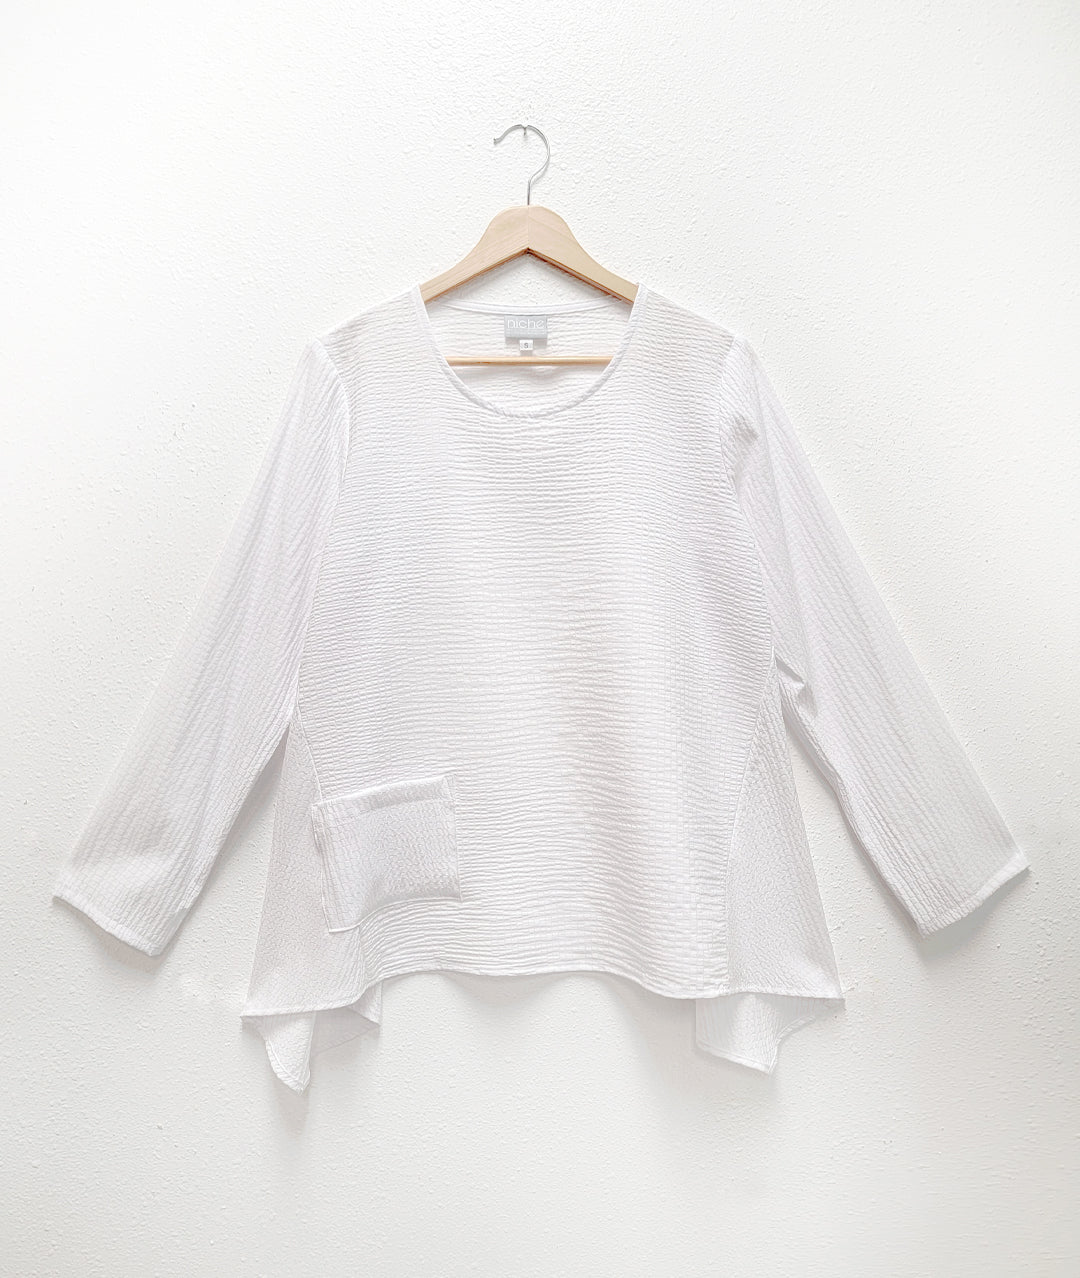 white pull over top with a single squared hip pocket, long sleeves and a hankerchief hemline